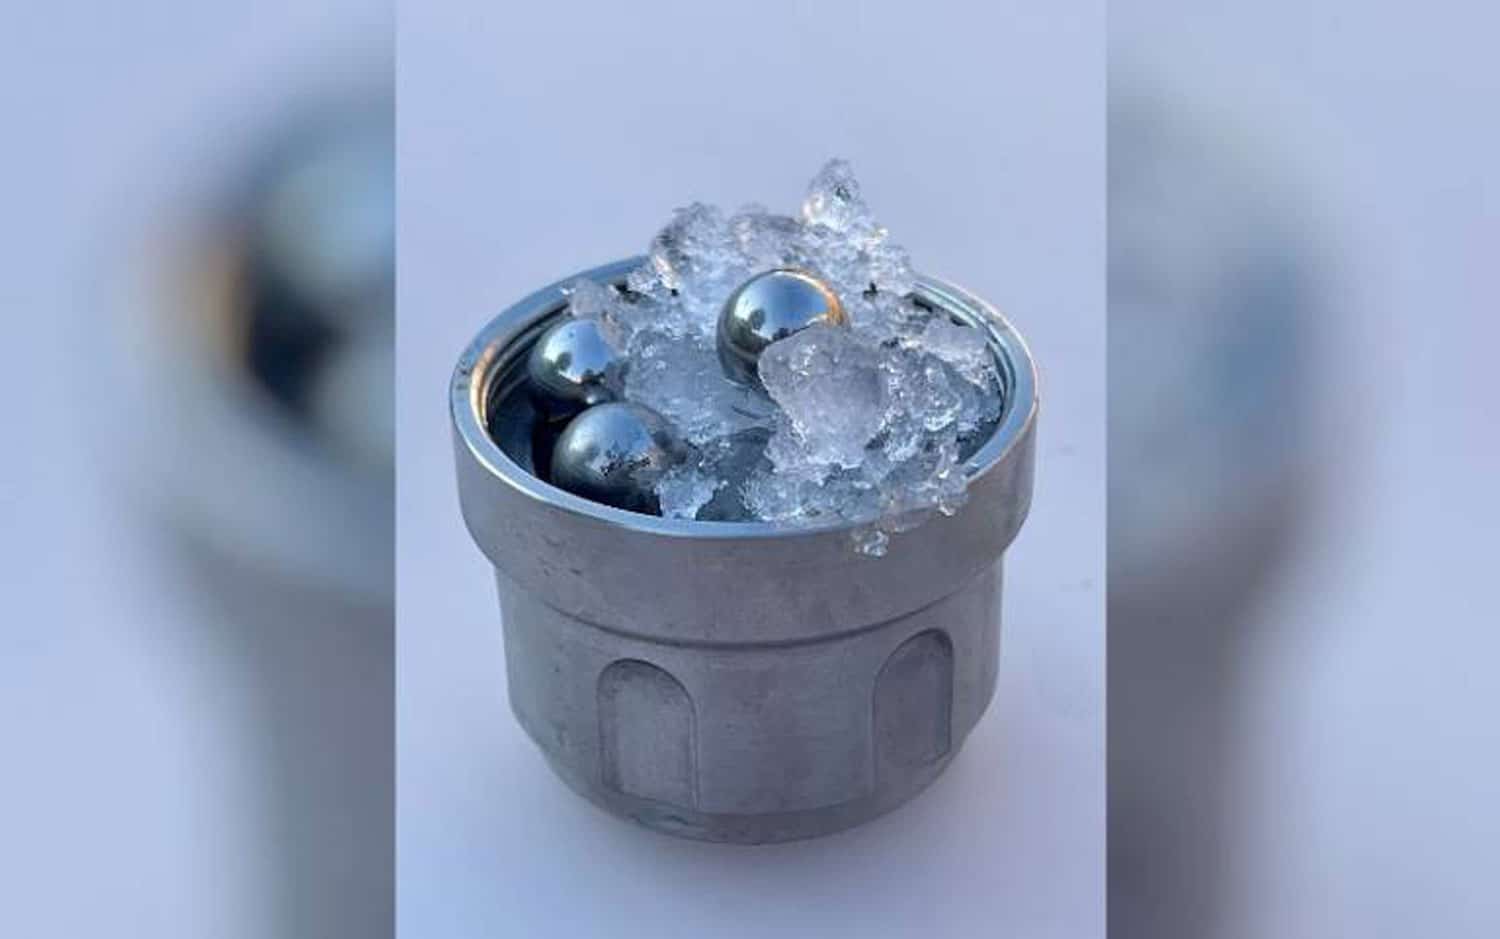 Scientists discovered a new type of ice that could change understanding of water